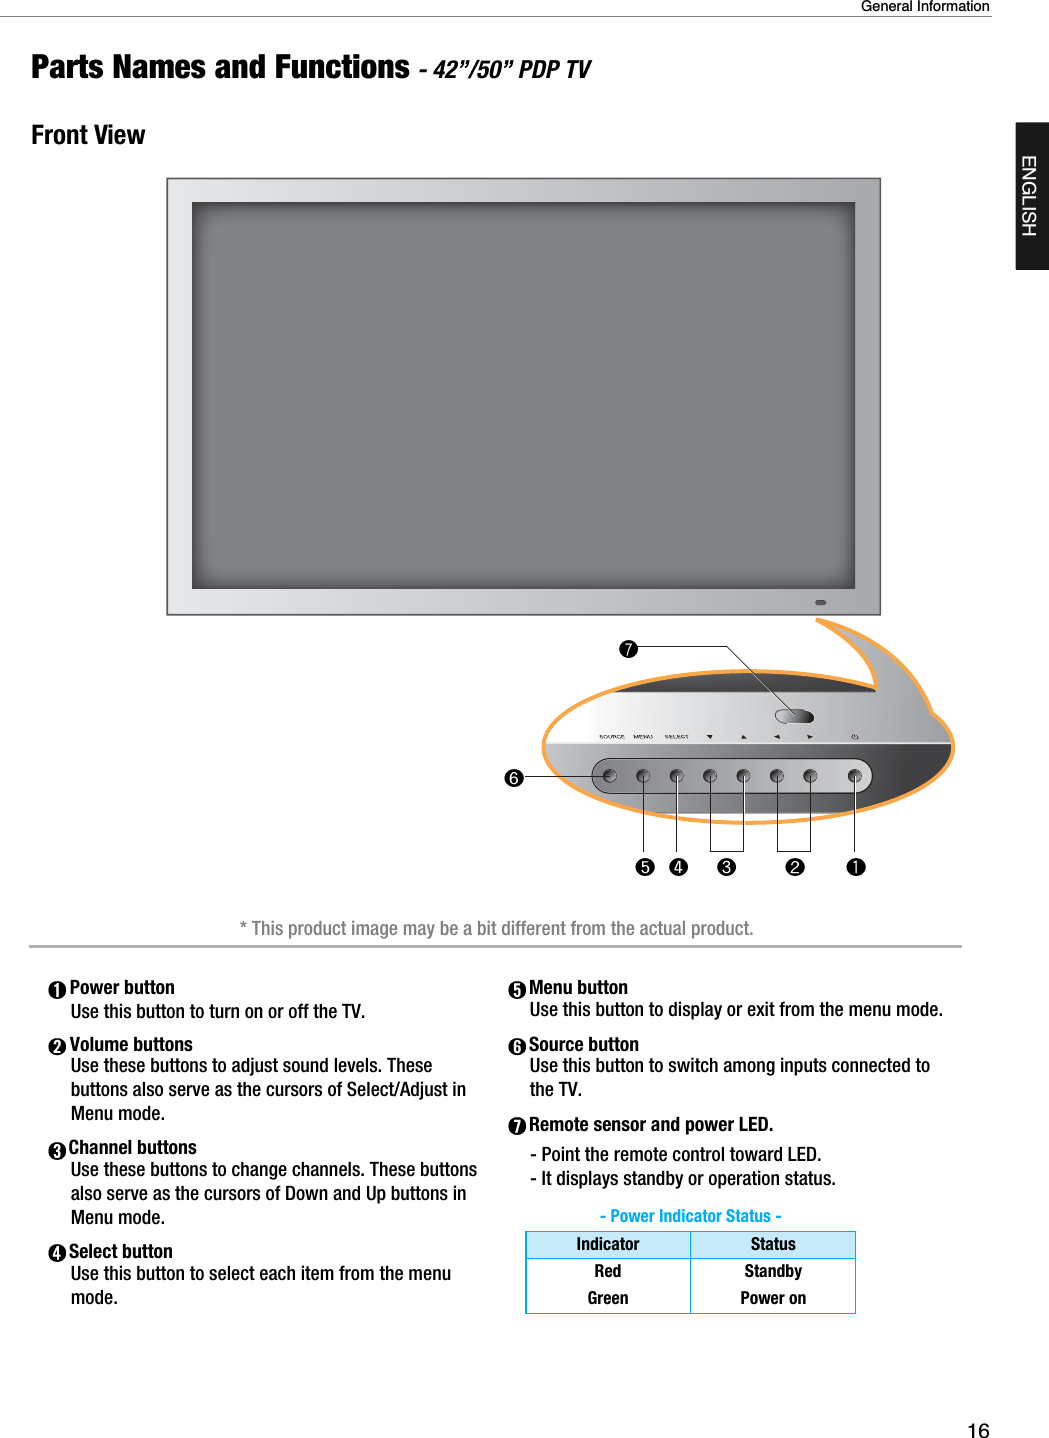 ENGLISH16General InformationParts Names and Functions - 42”/50” PDP TVFront ViewPower buttonUse this button to turn on or off the TV.Volume buttonsUse these buttons to adjust sound levels. Thesebuttons also serve as the cursors of Select/Adjust inMenu mode.Channel buttonsUse these buttons to change channels. These buttonsalso serve as the cursors of Down and Up buttons inMenu mode.Select buttonUse this button to select each item from the menumode.Menu buttonUse this button to display or exit from the menu mode.Source buttonUse this button to switch among inputs connected tothe TV.Remote sensor and power LED.- Point the remote control toward LED.- It displays standby or operation status.* This product image may be a bit different from the actual product.- Power Indicator Status -IndicatorRedGreenStatusStandbyPower on